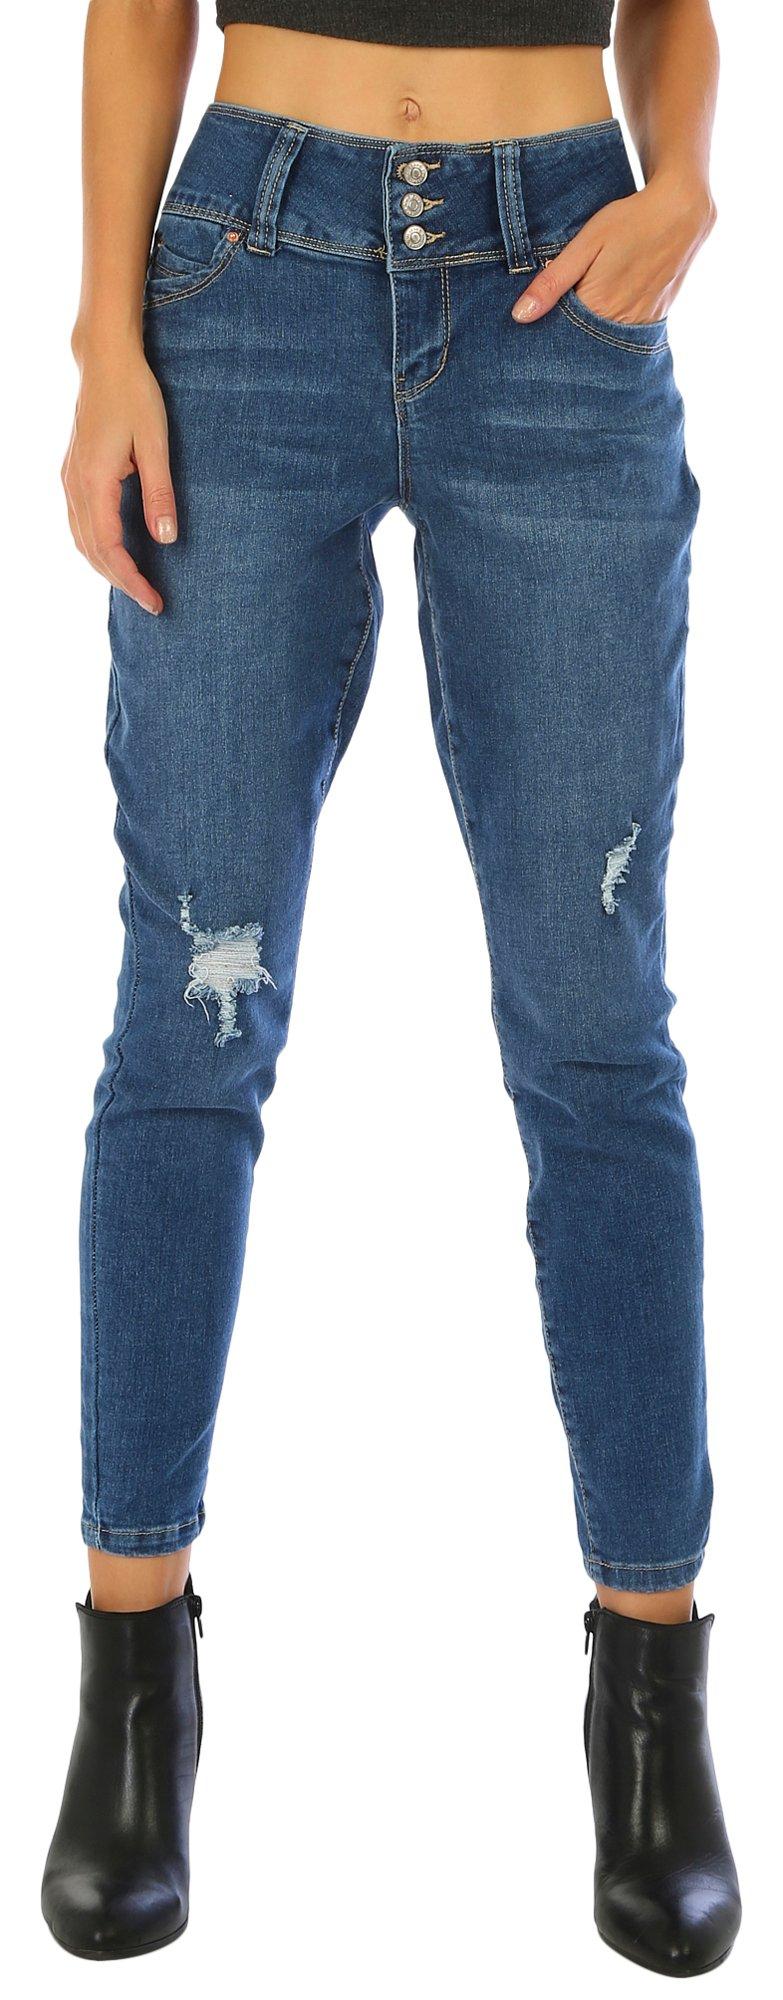 YMI Juniors Mid Rise WBB Deconstructed Skinny Jeans